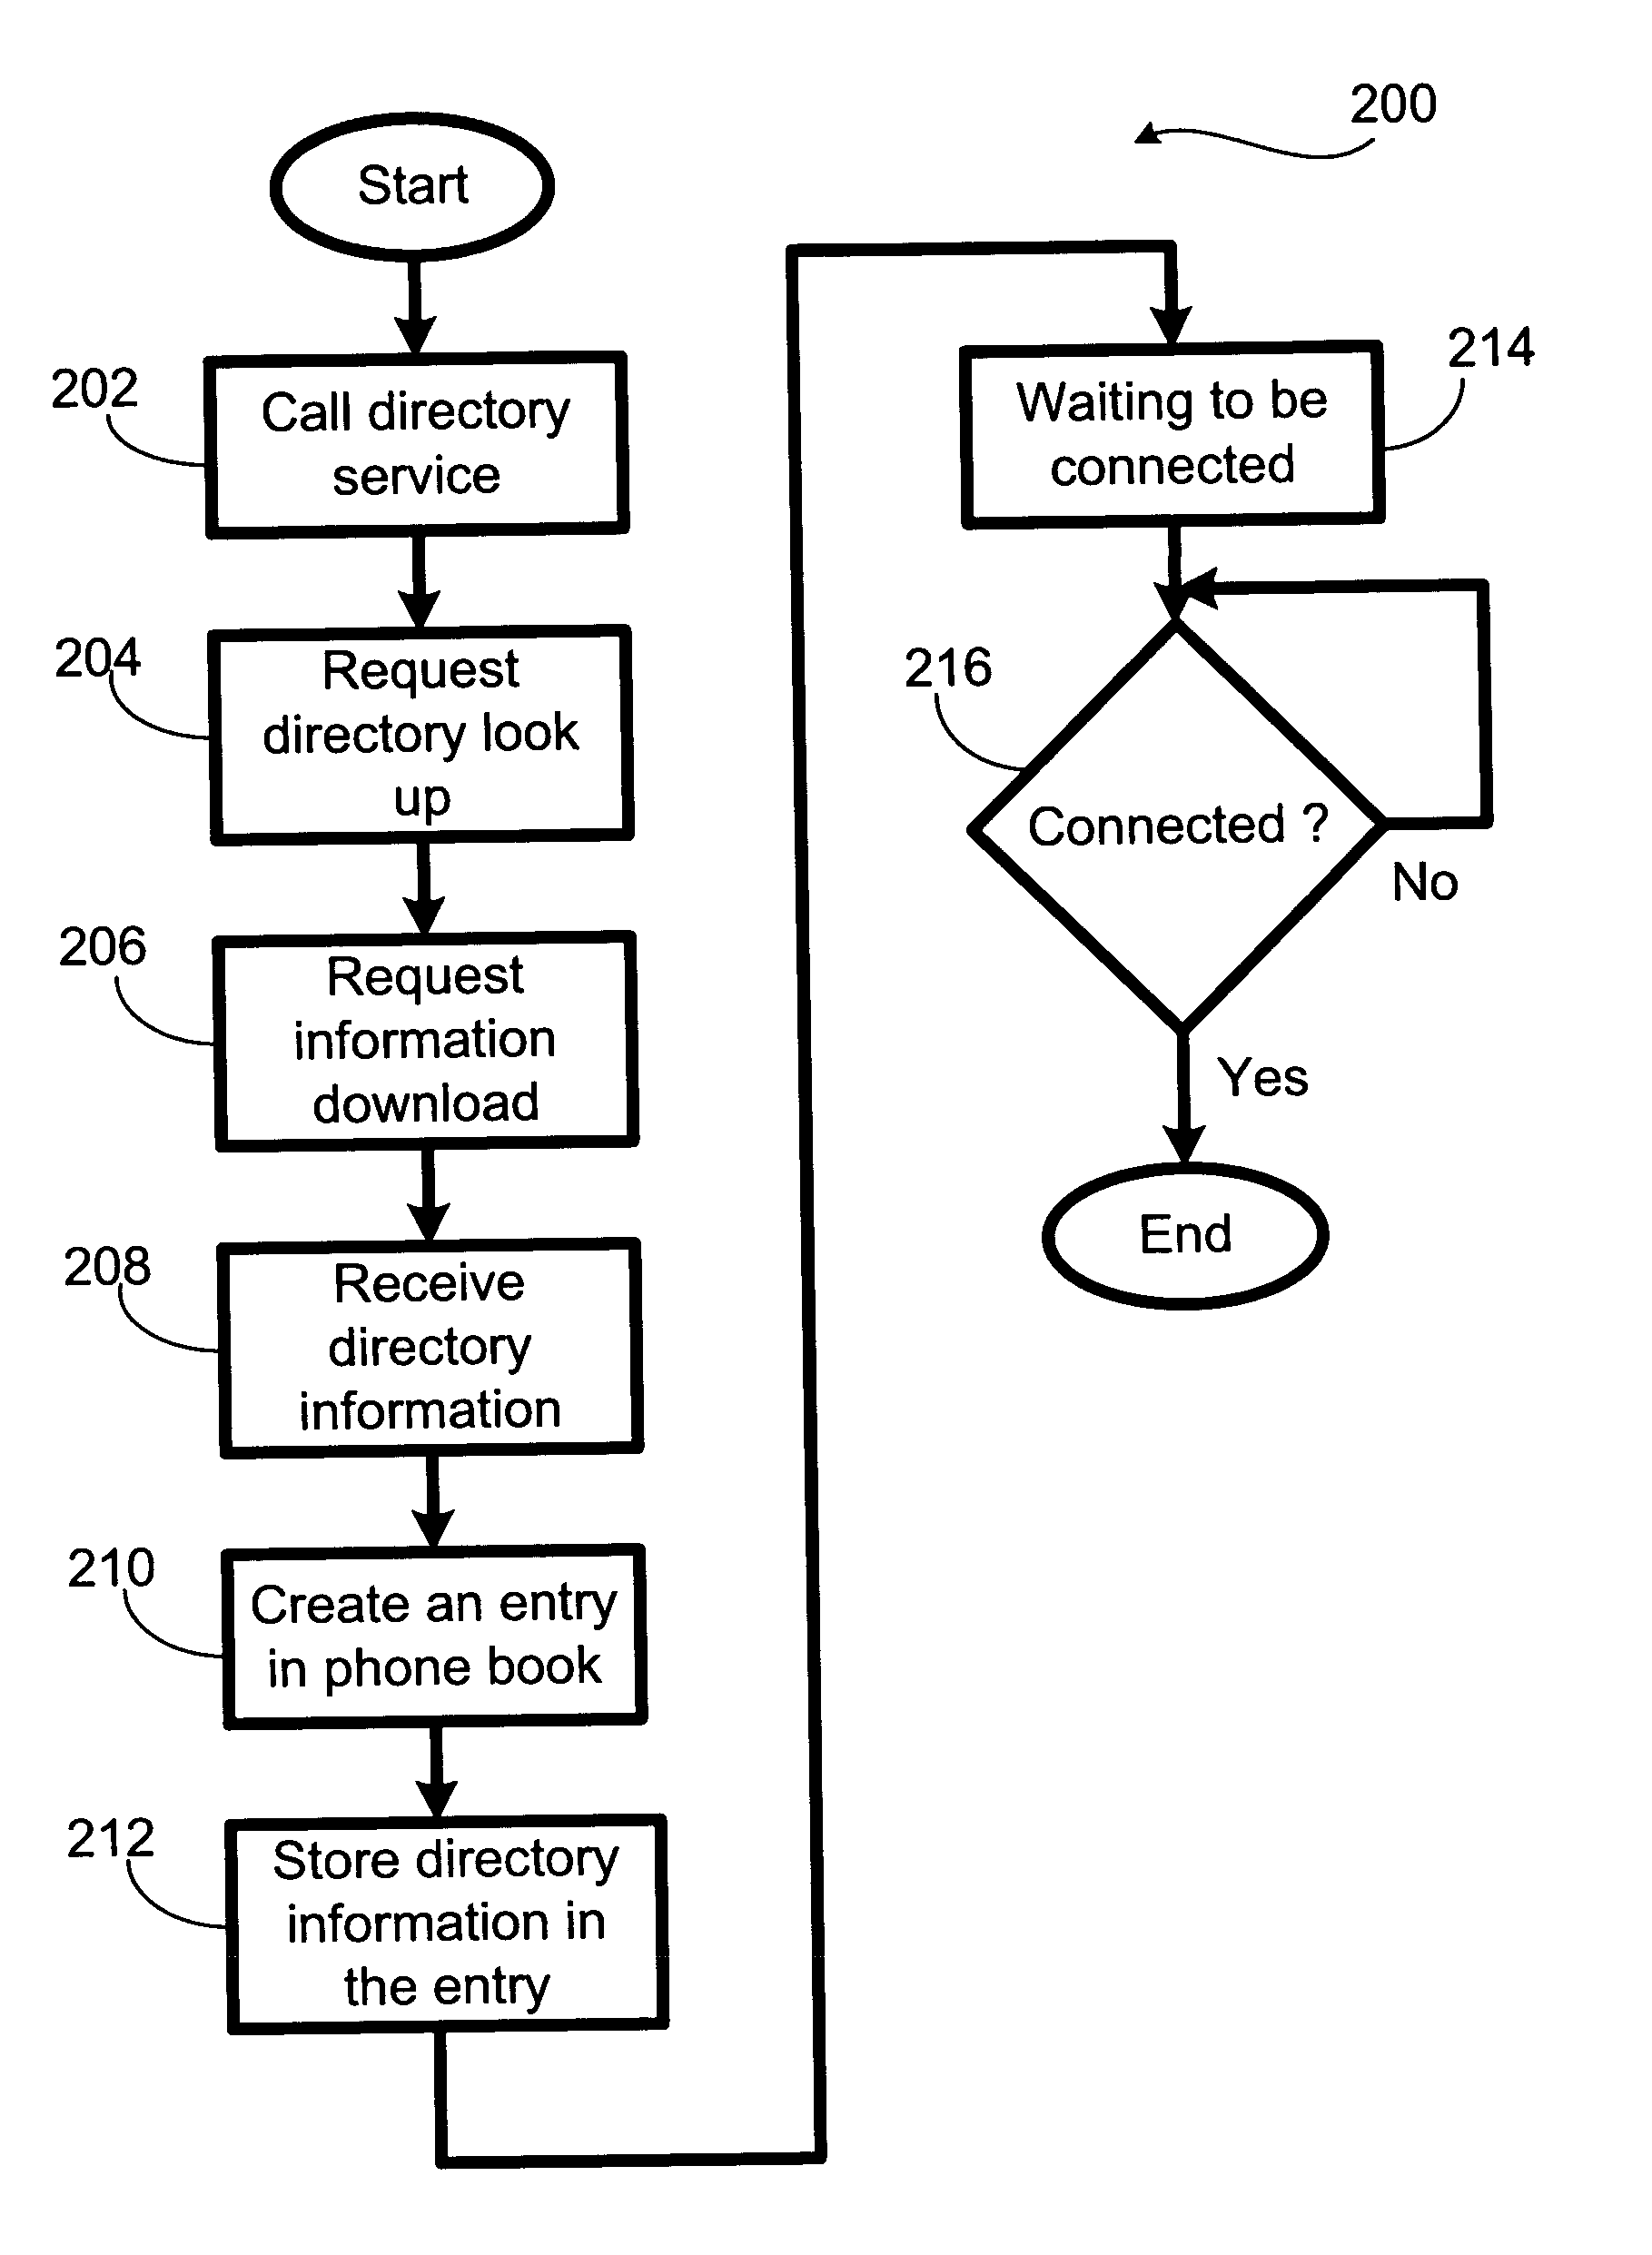 Automatic data entry into wireless device directory